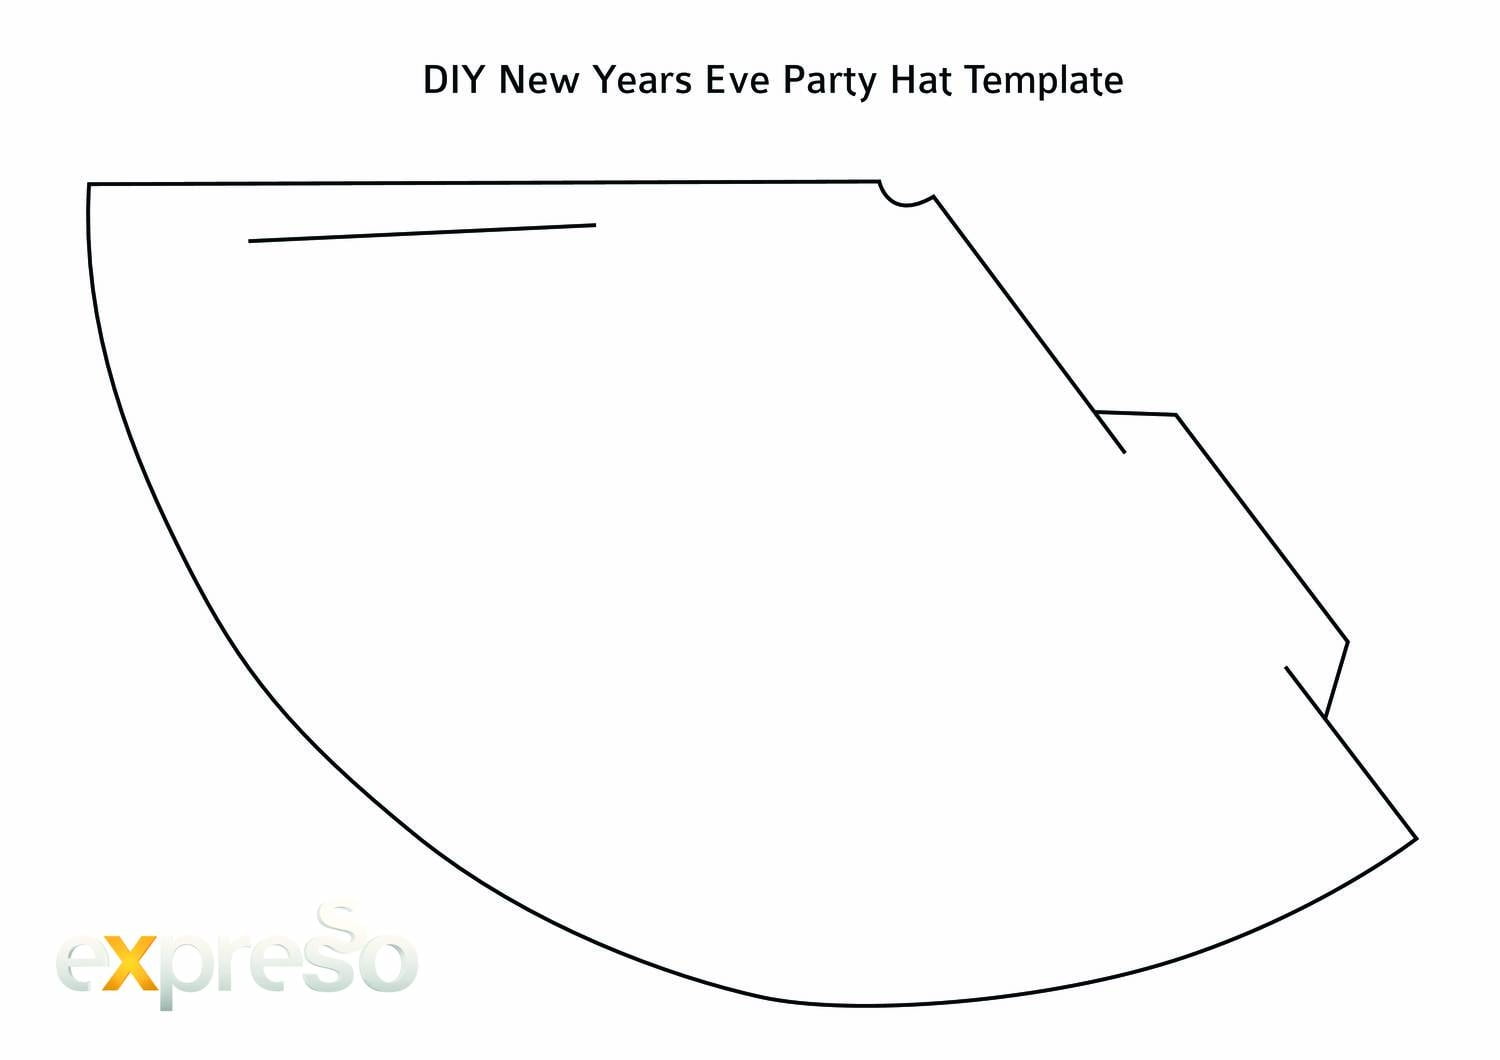 DIY New Years Eve Party Hat Template pdf DocDroid